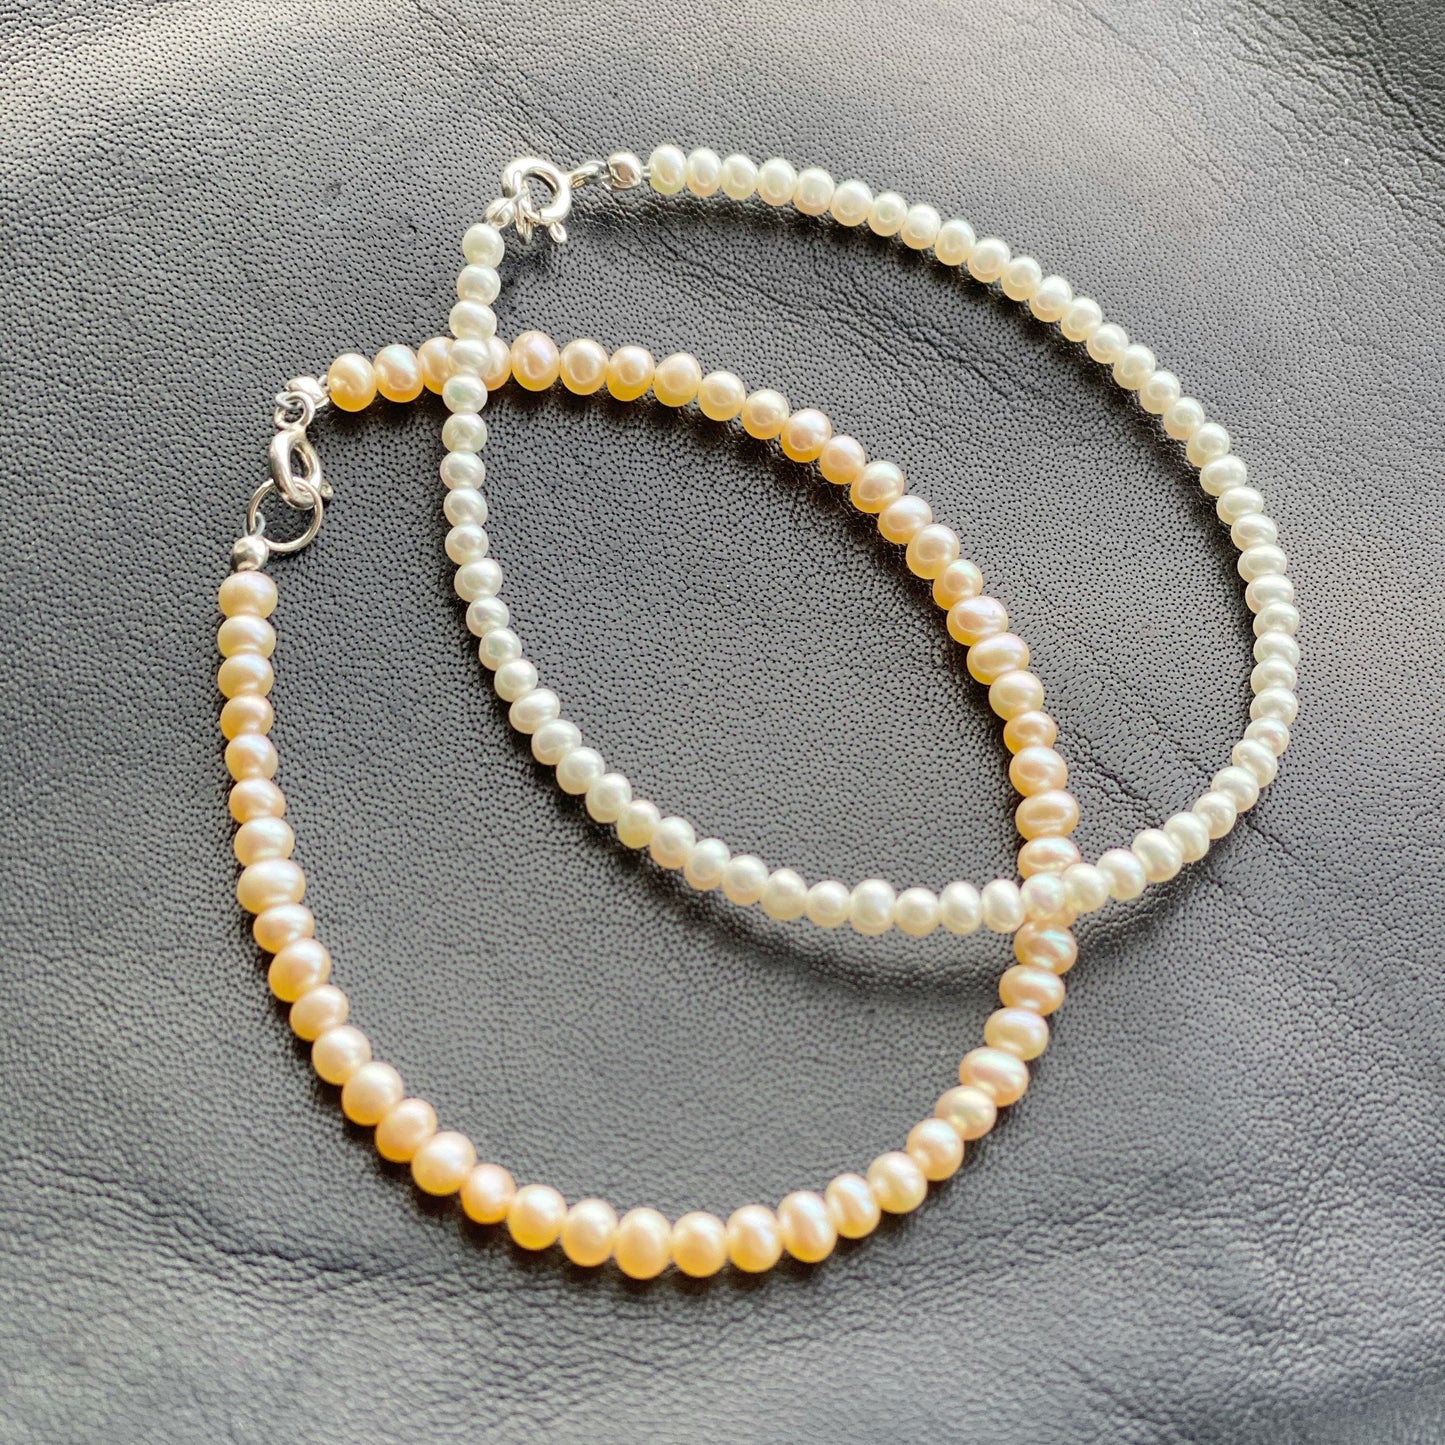 Baby freshwater pearl bracelets (white or peach freshwater pearl)